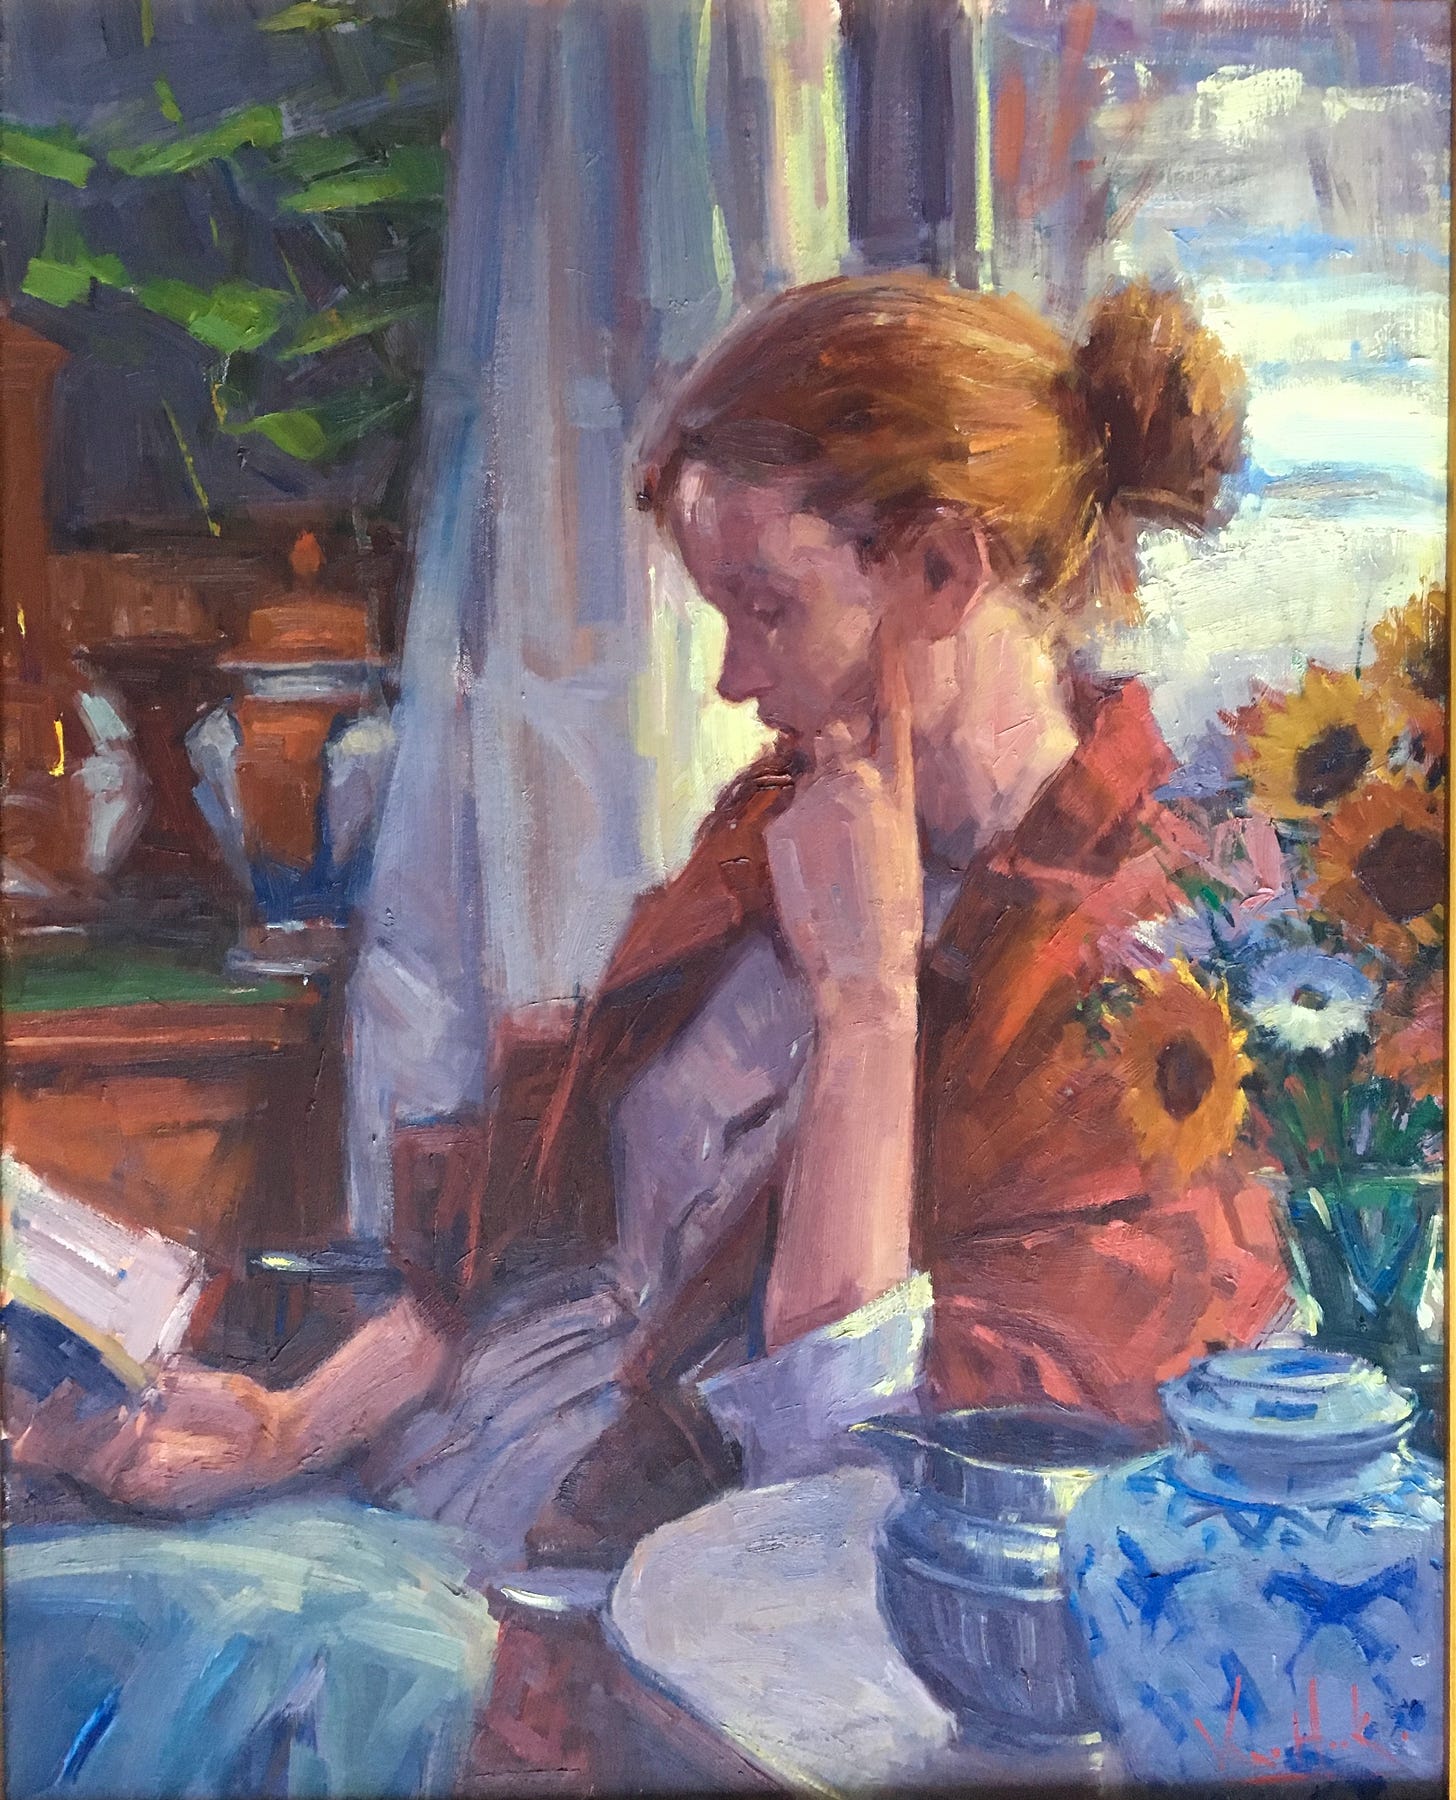 A painting of a person reading a book

Description automatically generated